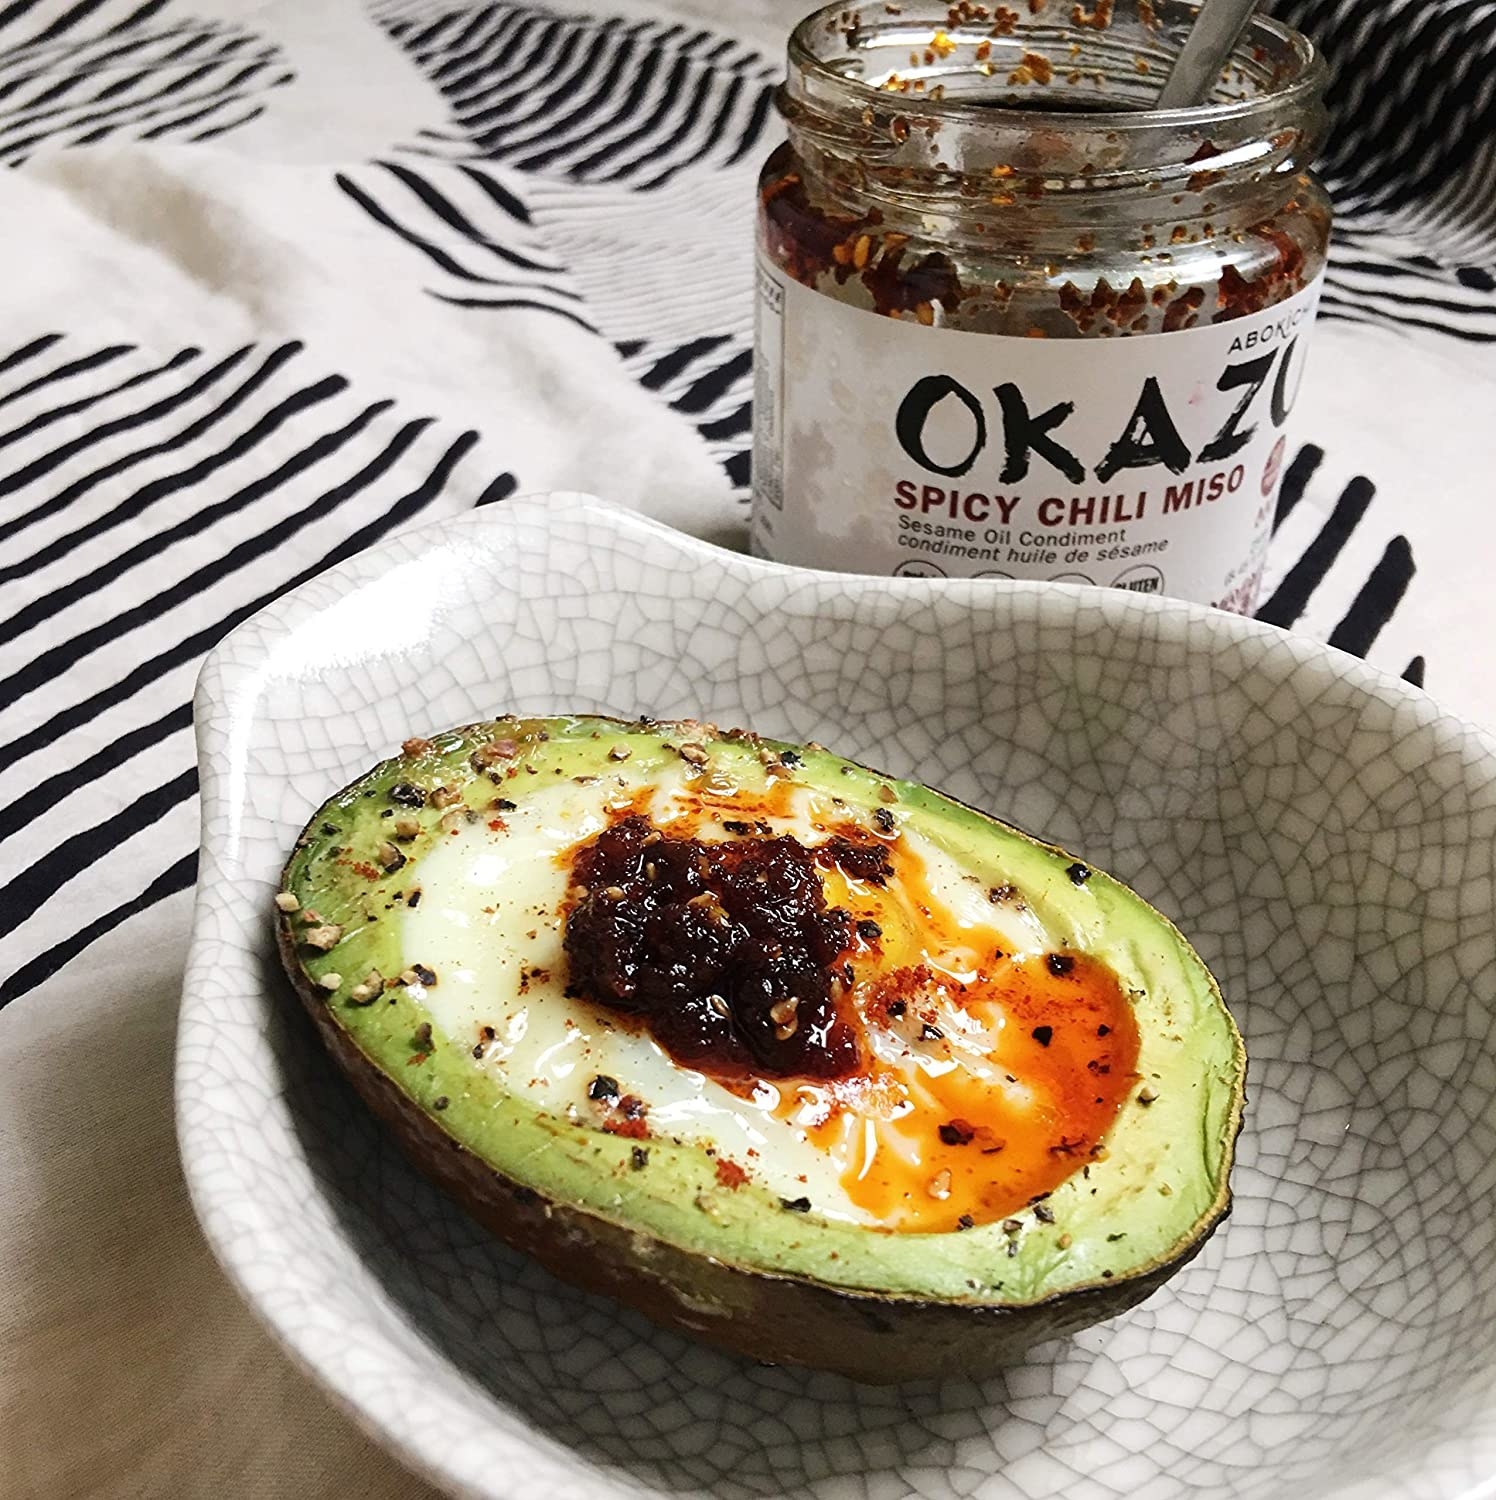 An avocado with chili miso suace on it